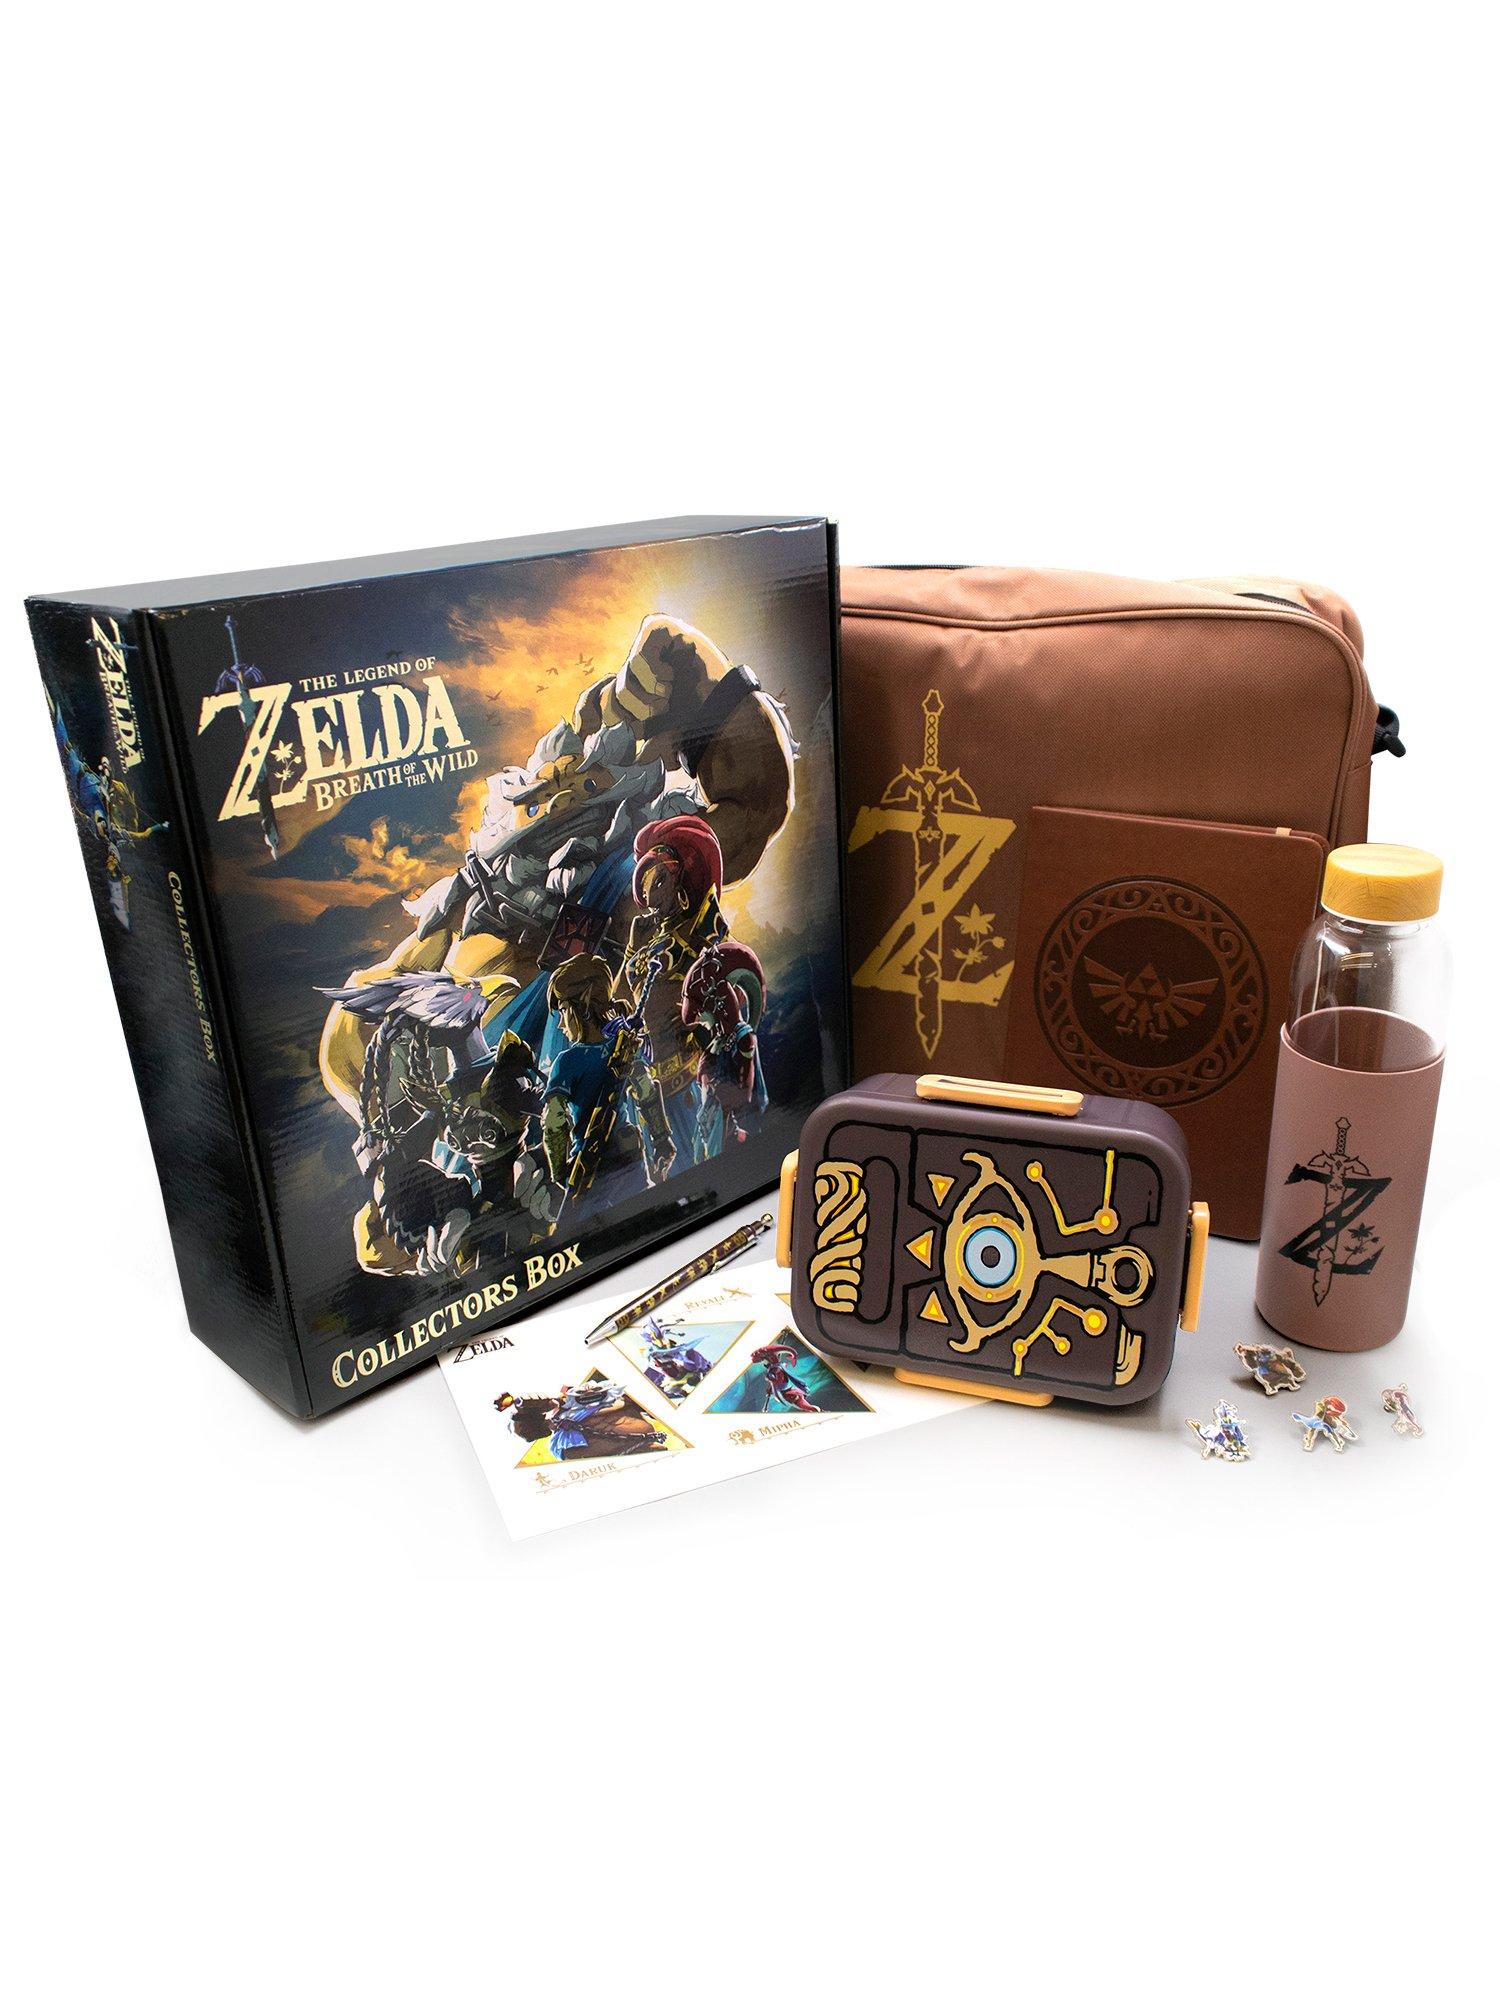 Buy The Legend of Zelda: Breath of the Wild Bundle from the Humble Store